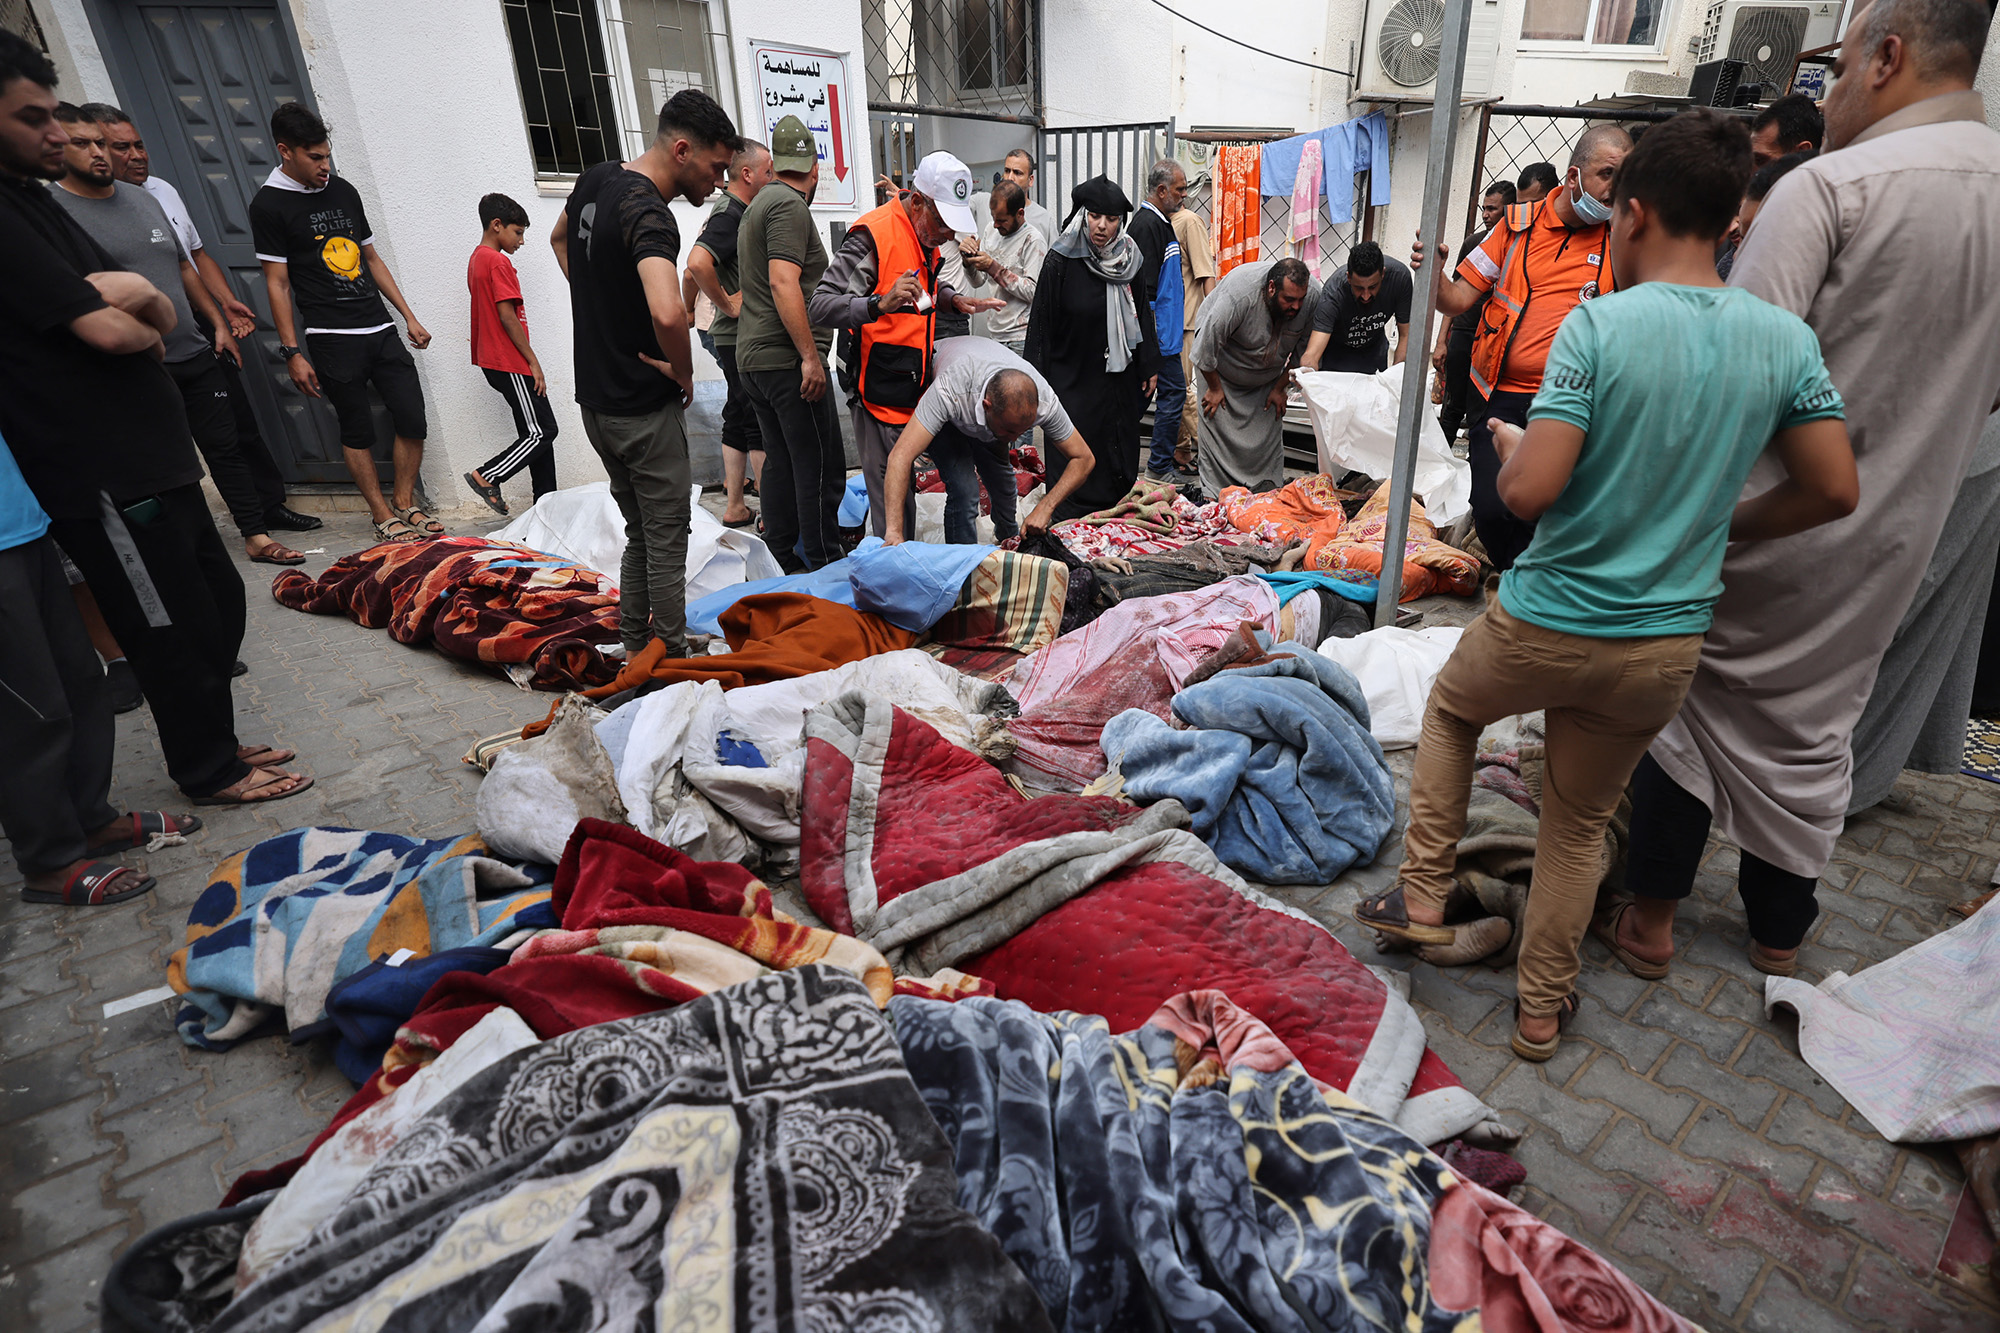 Palestinians victims covered in blankets are laid out on the ground at a hospital following an Israeli airstrike on Rafah, in southern Gaza, on October 17.